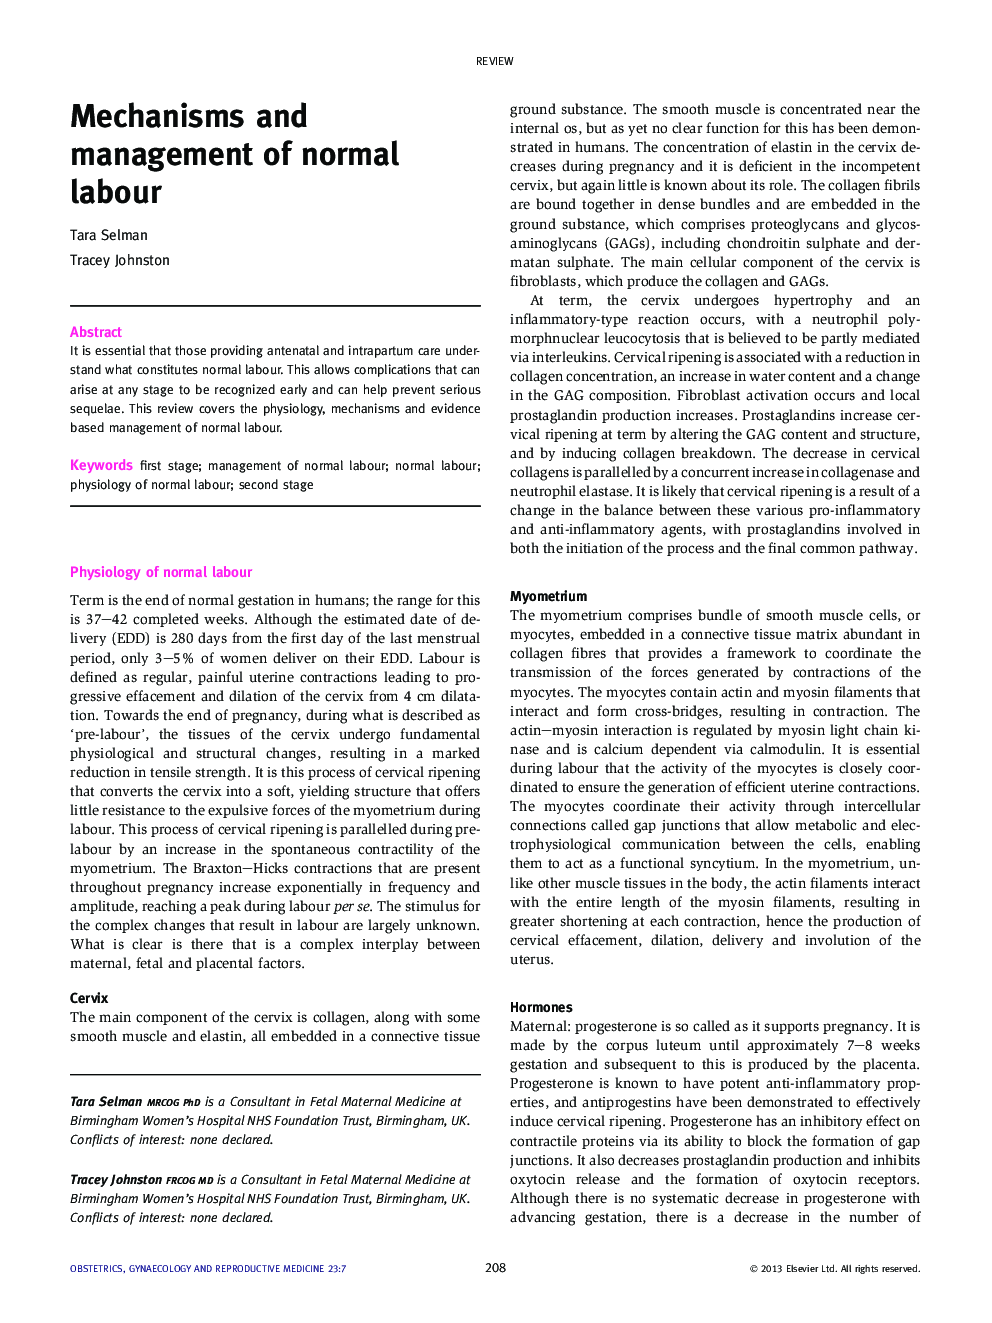 Mechanisms and management of normal labour